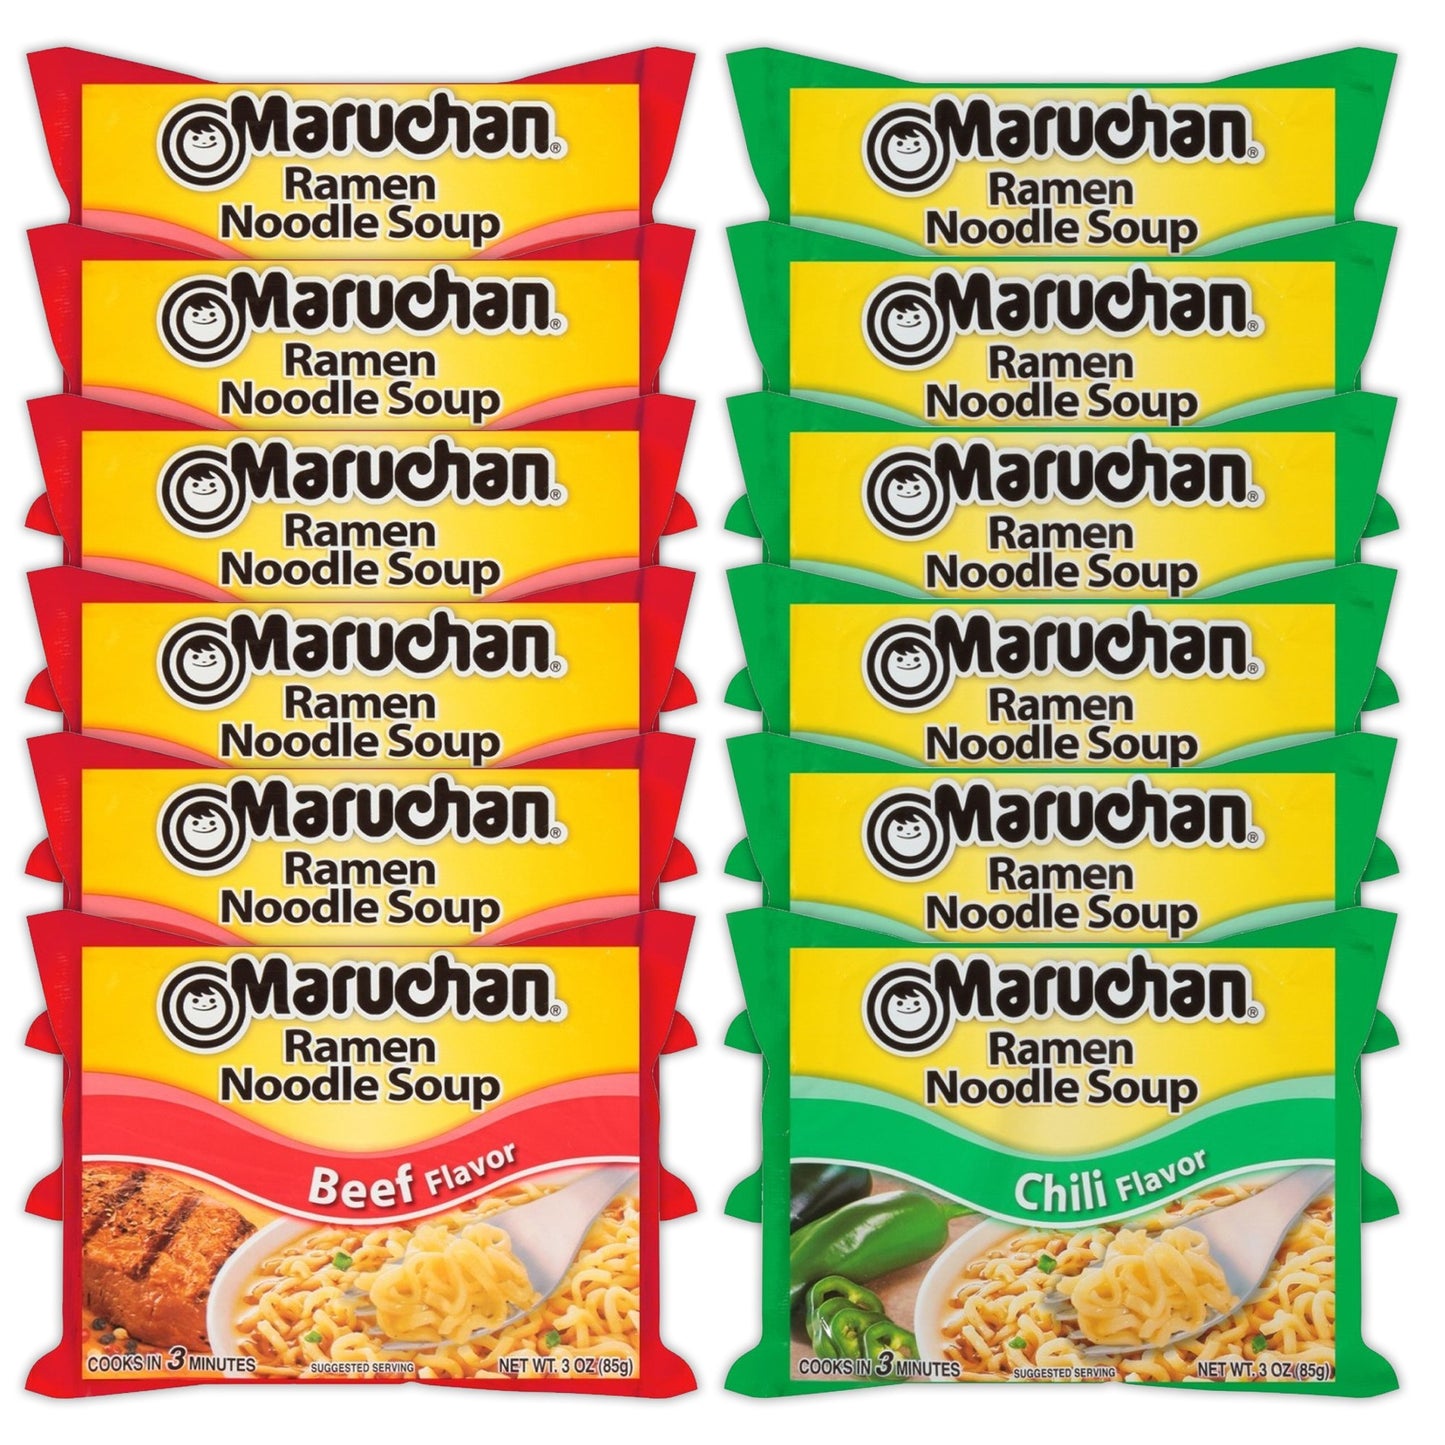 Maruchan Ramen Instant Noodle Soup Variety, 2 Flavors - 6 Packs Beef & 6 Packs Chili , 3 Ounce Single Servings Lunch / Dinner Variety